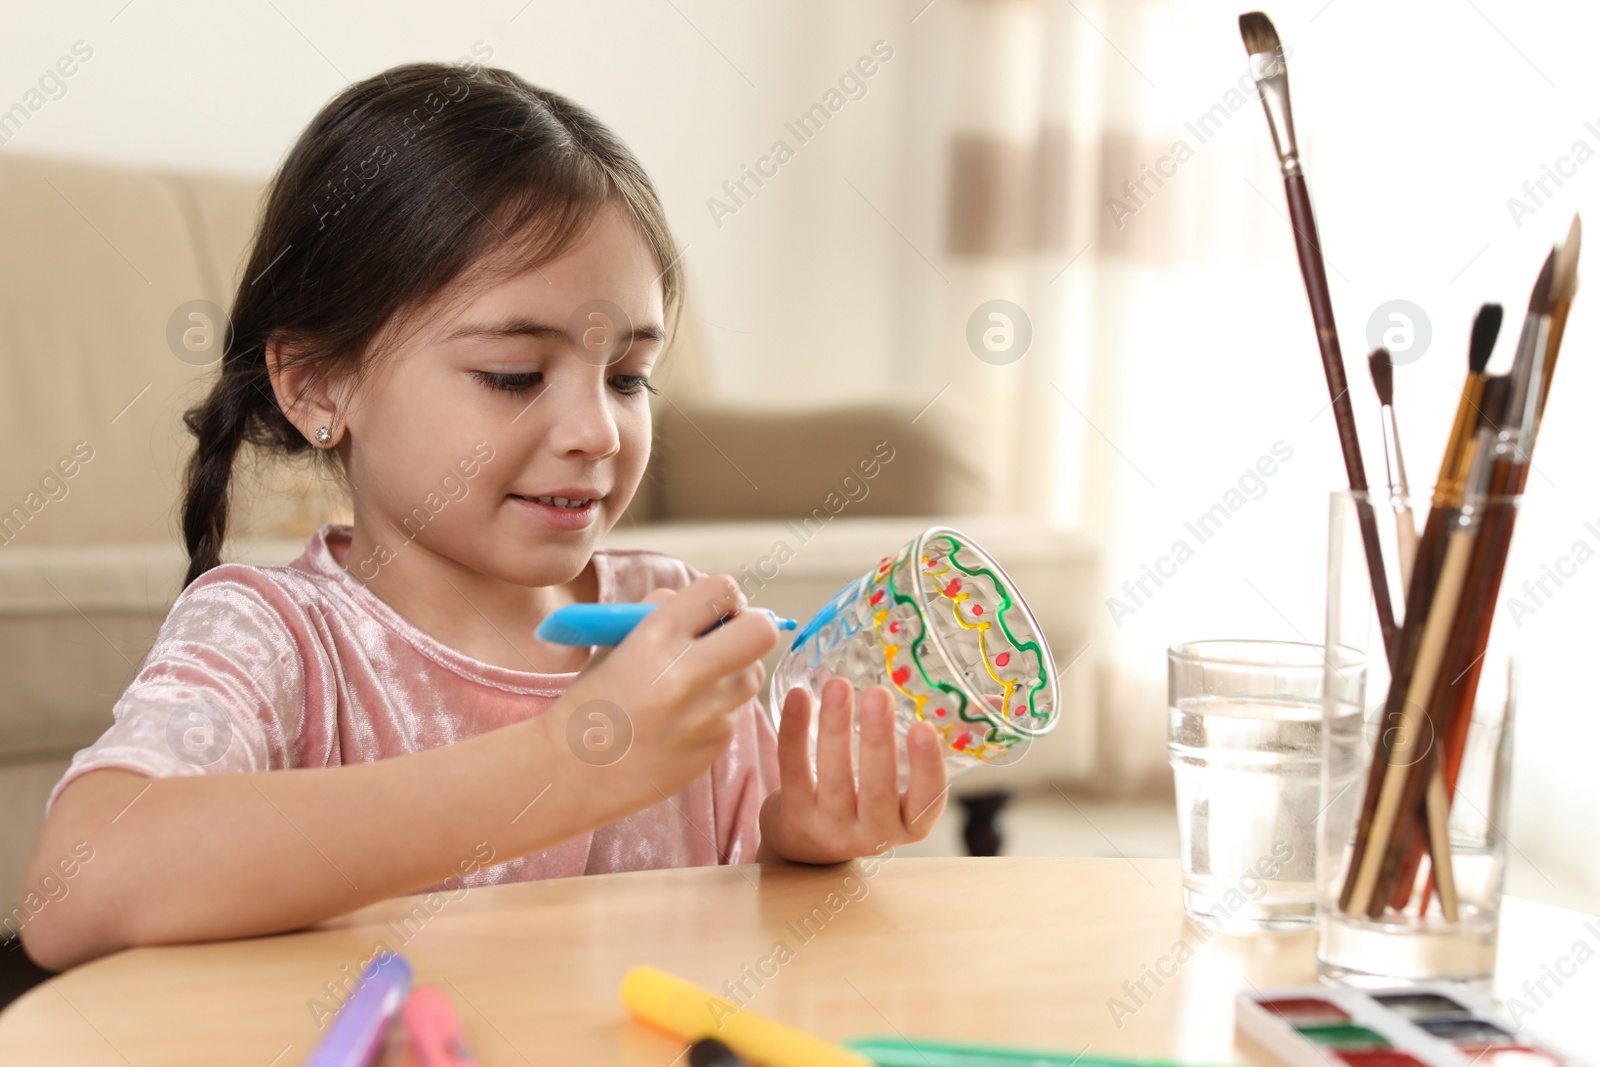 Photo of Little girl painting glass at table indoors. Creative hobby